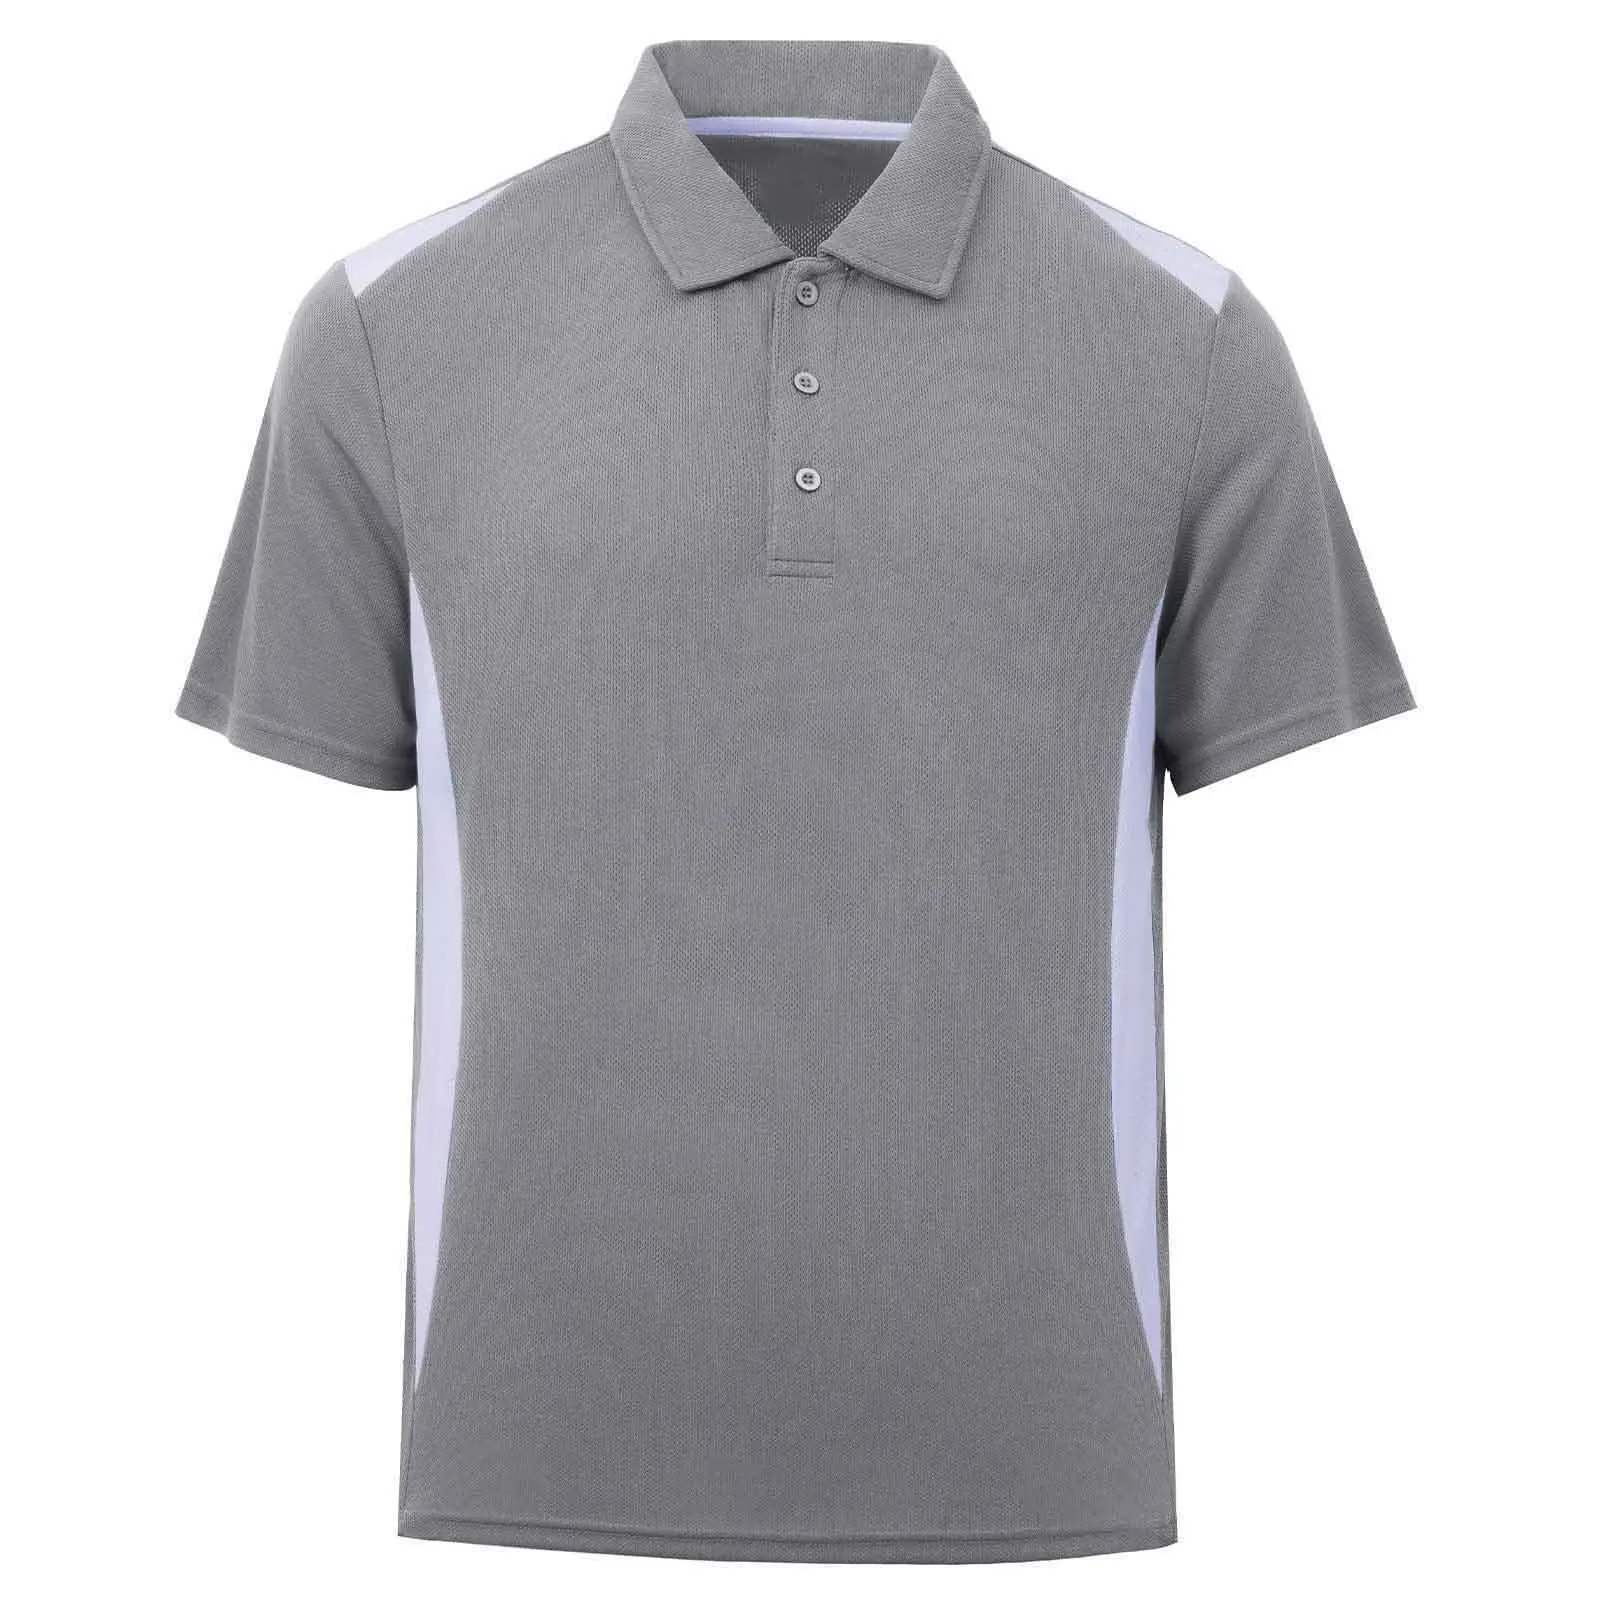 High quality solid color Polo shirt Fashion golf shirt Men's white breathable embroidered printed Polo shirt short sleeve